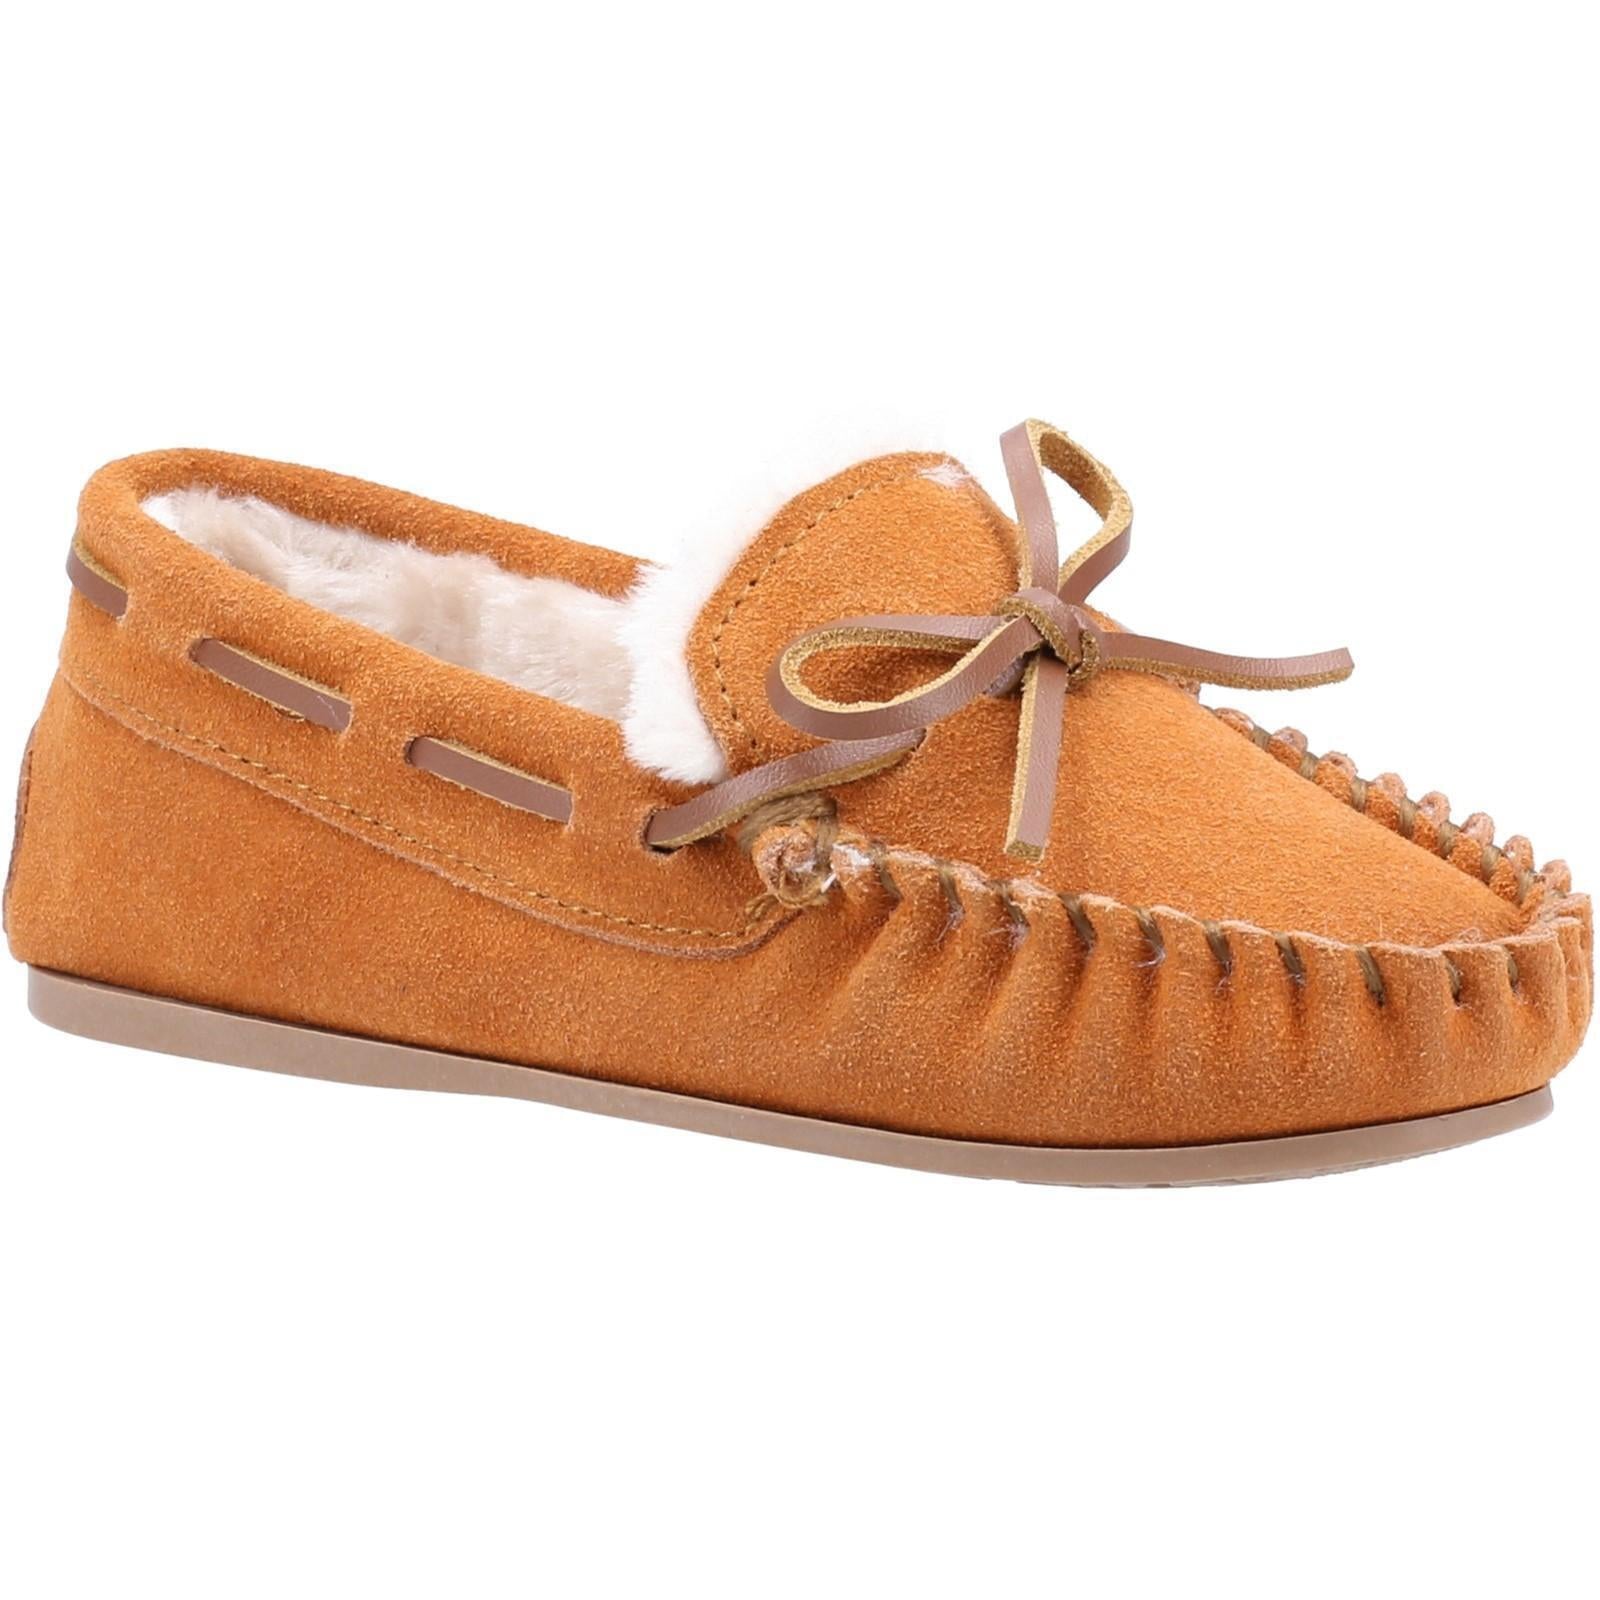 Hush Puppies Addison tan suede upper faux fur lined moccasin slipper